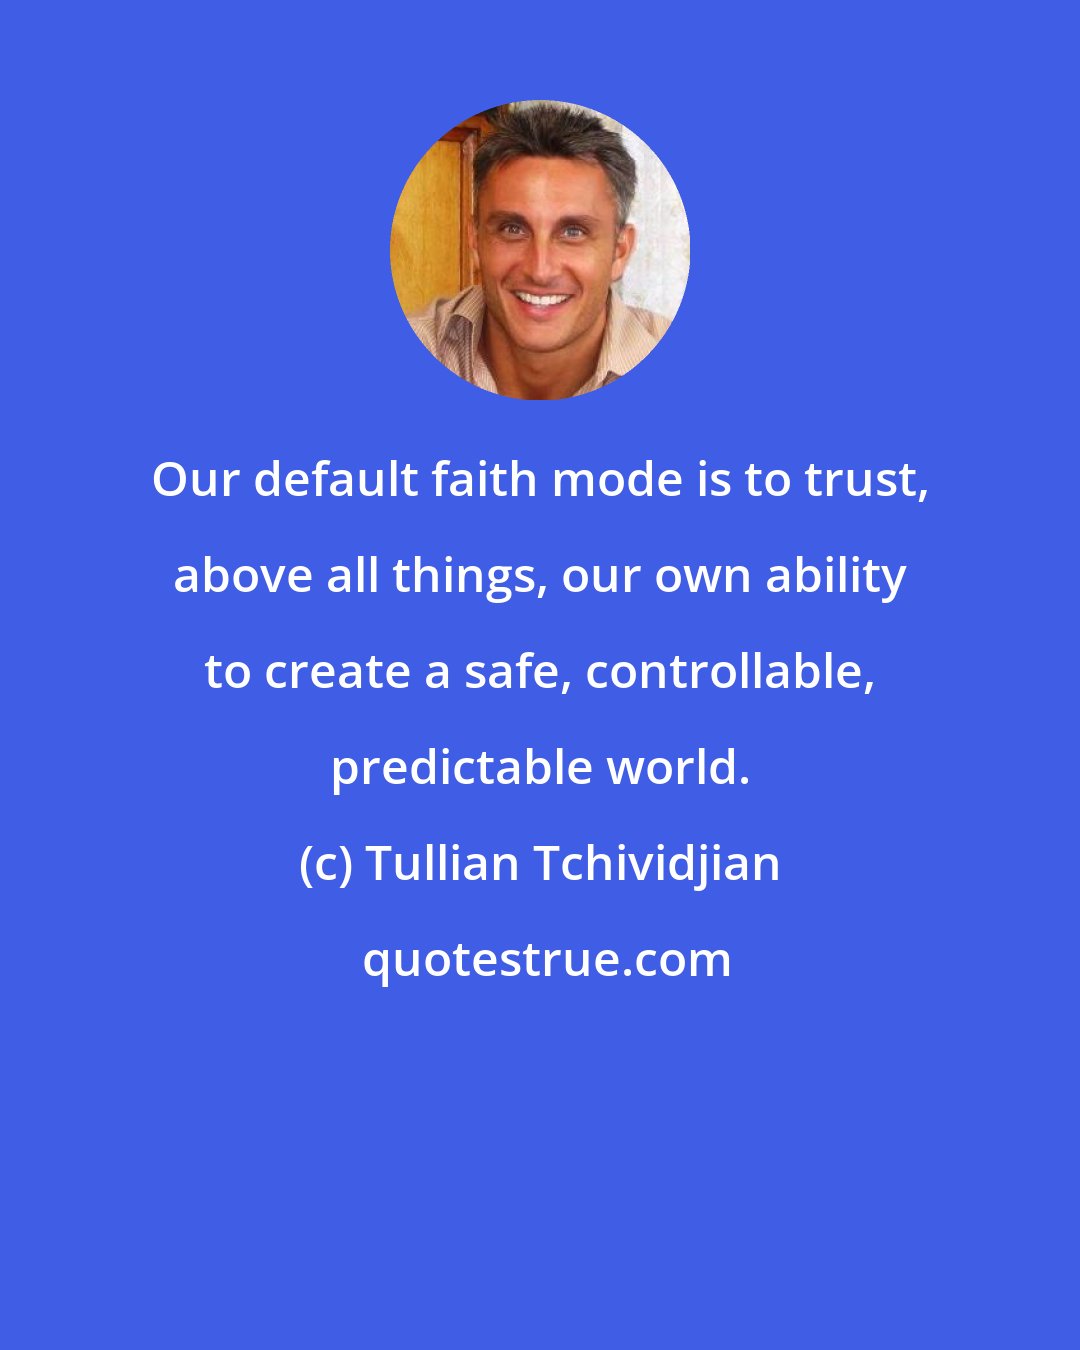 Tullian Tchividjian: Our default faith mode is to trust, above all things, our own ability to create a safe, controllable, predictable world.